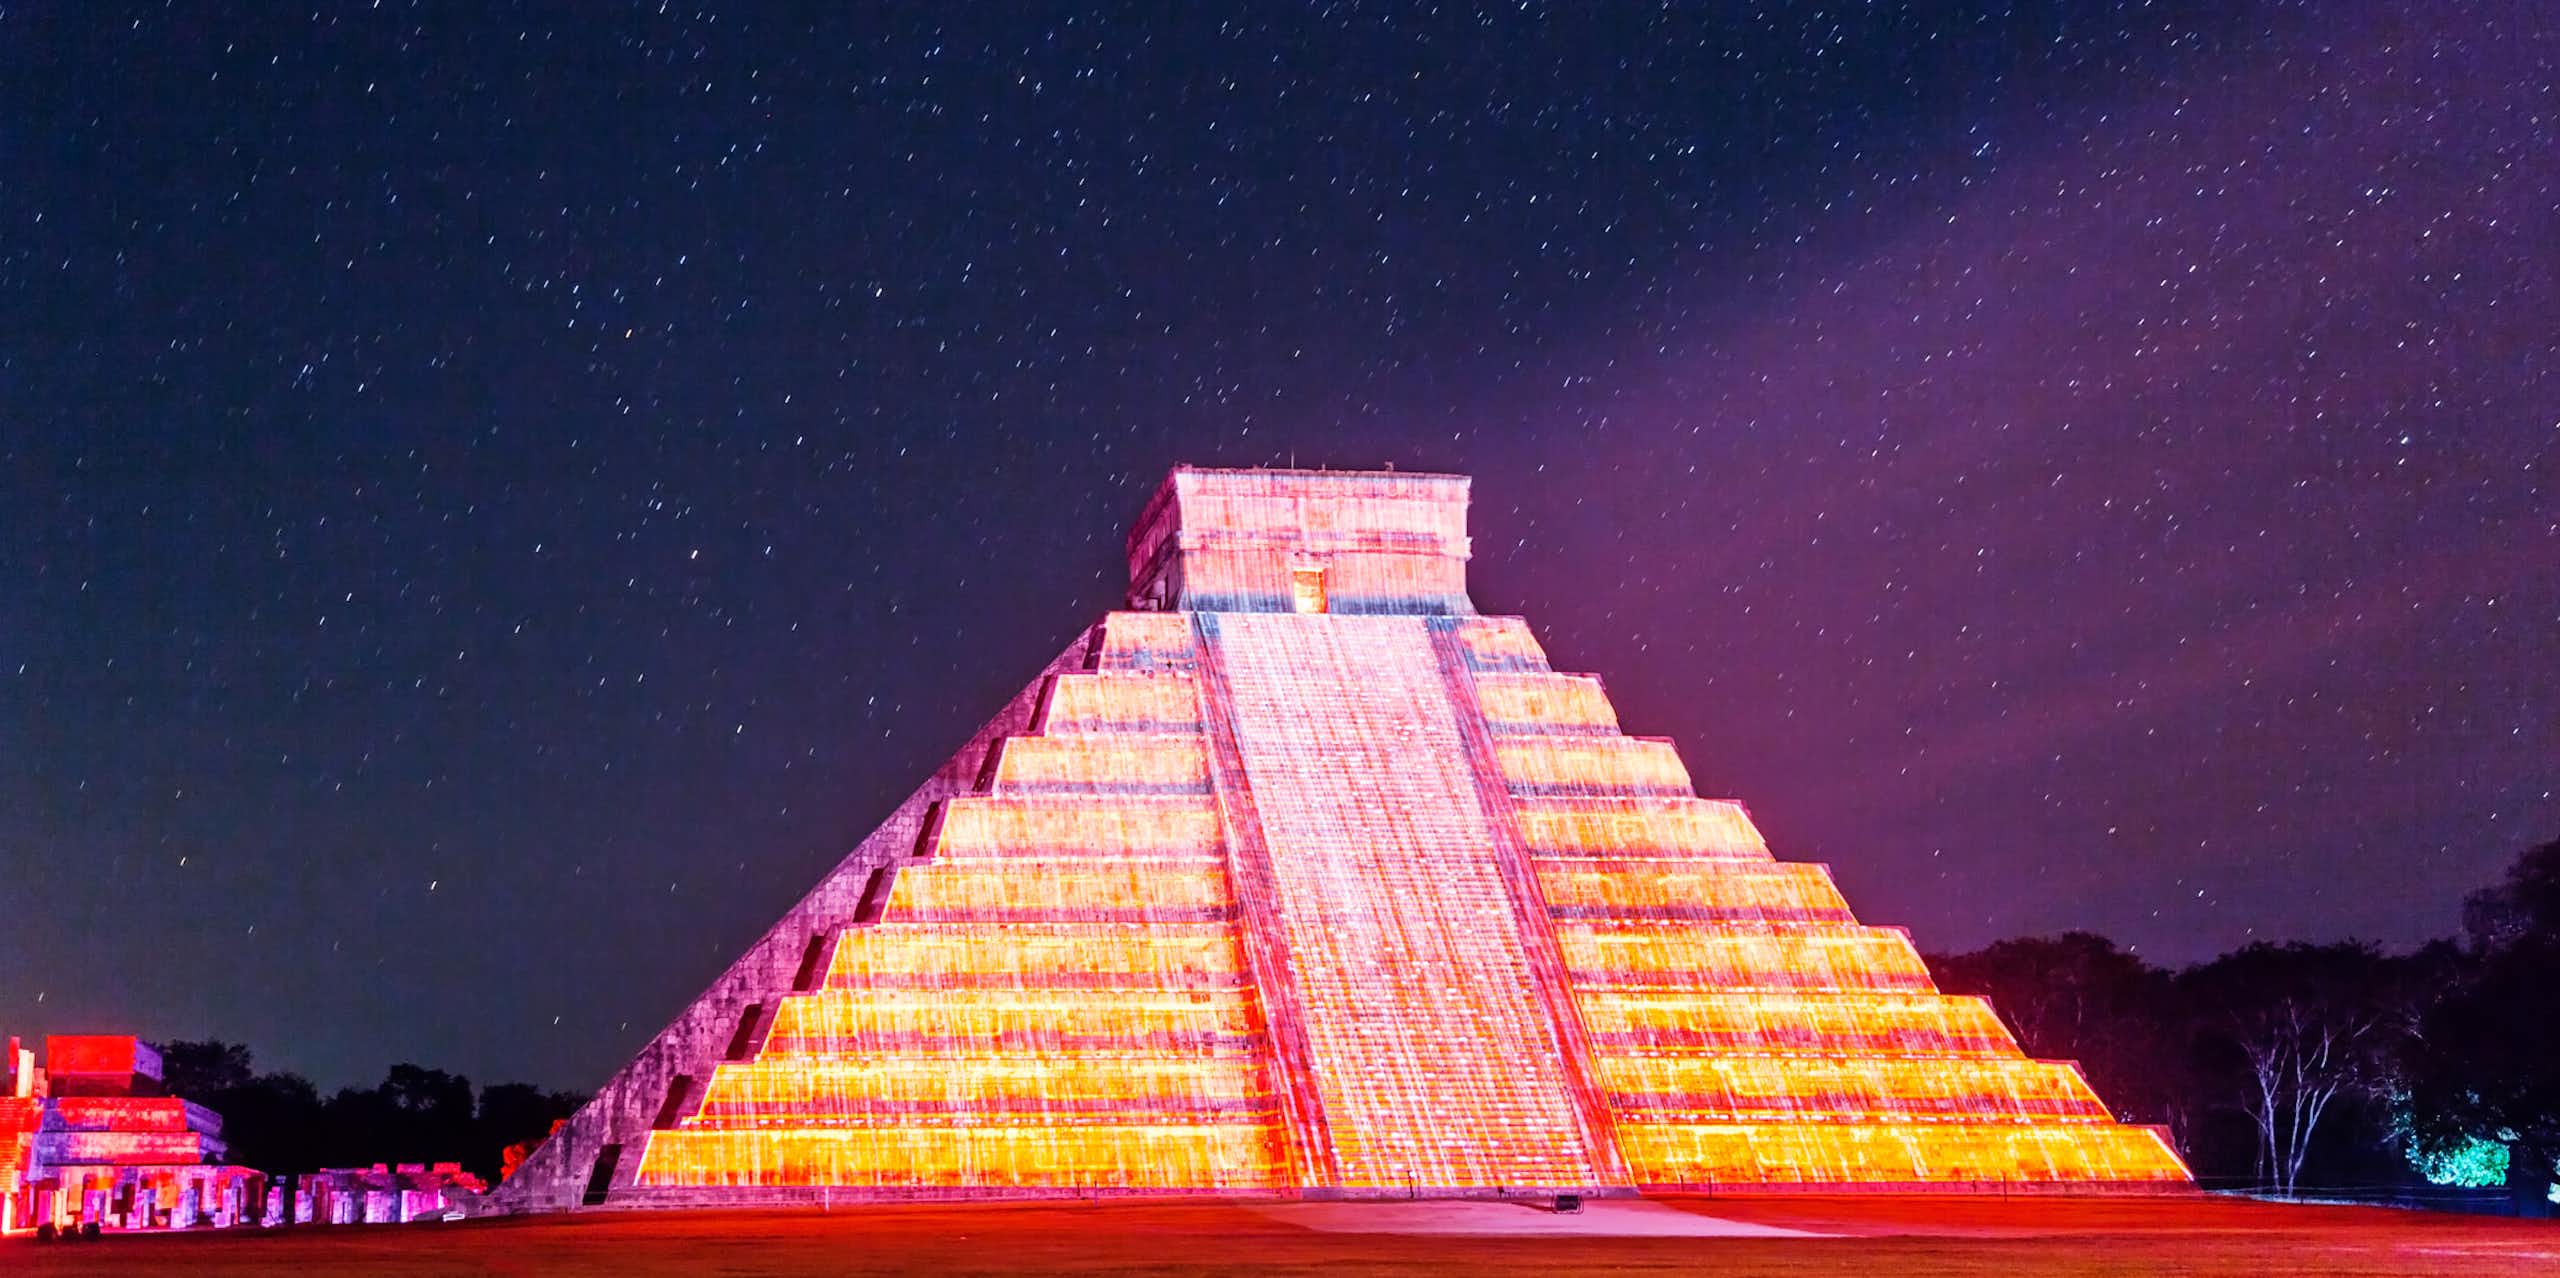 A stone pyramid with many tiers, lit up in shades of yellow and pink under a night sky with lots of stars.